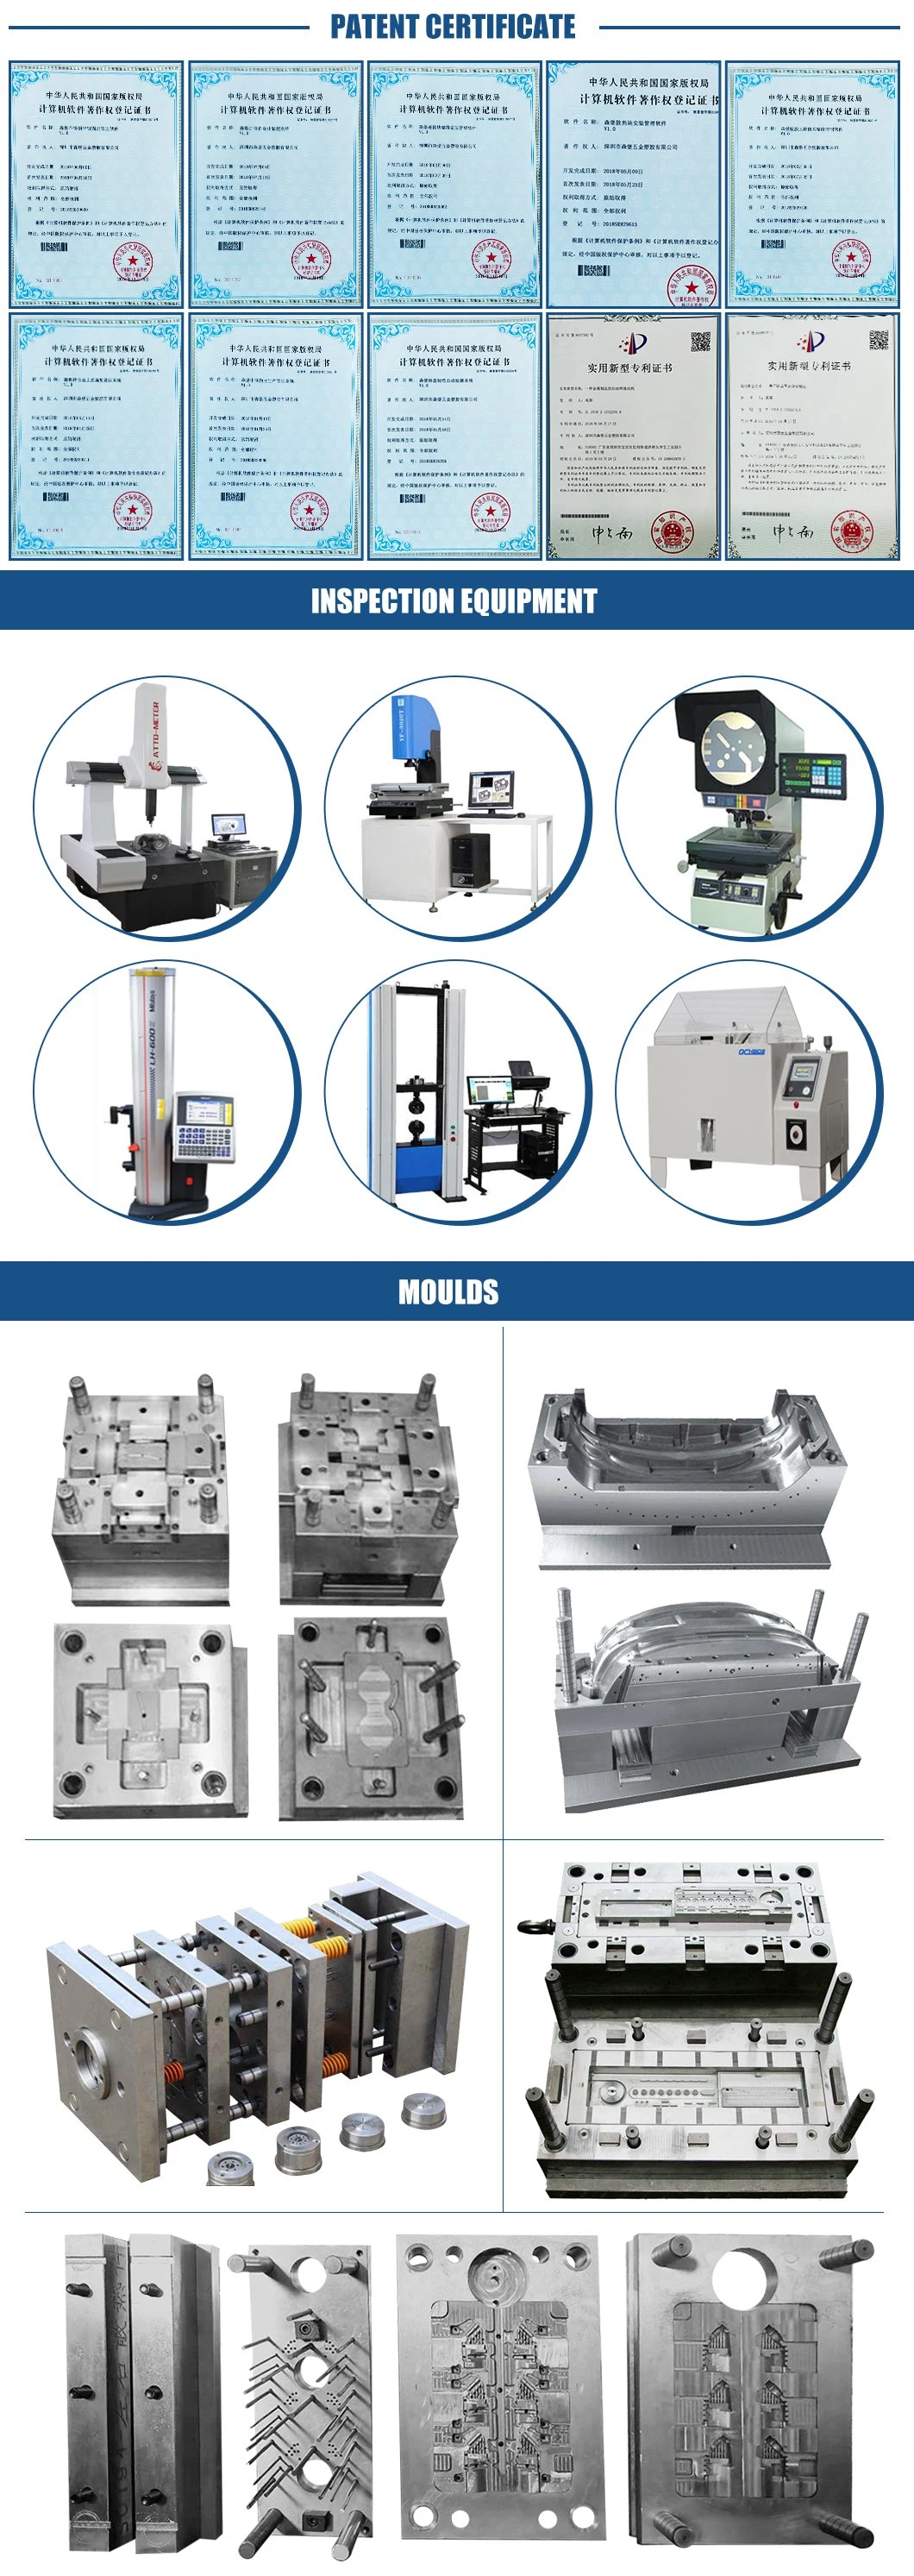 Factory Customized Die Casting Mould for Auto Lighting Parts/Electronic Products Parts/Appliances Parts/Medical Part /Daily Use Products/Machinery Parts/Molds